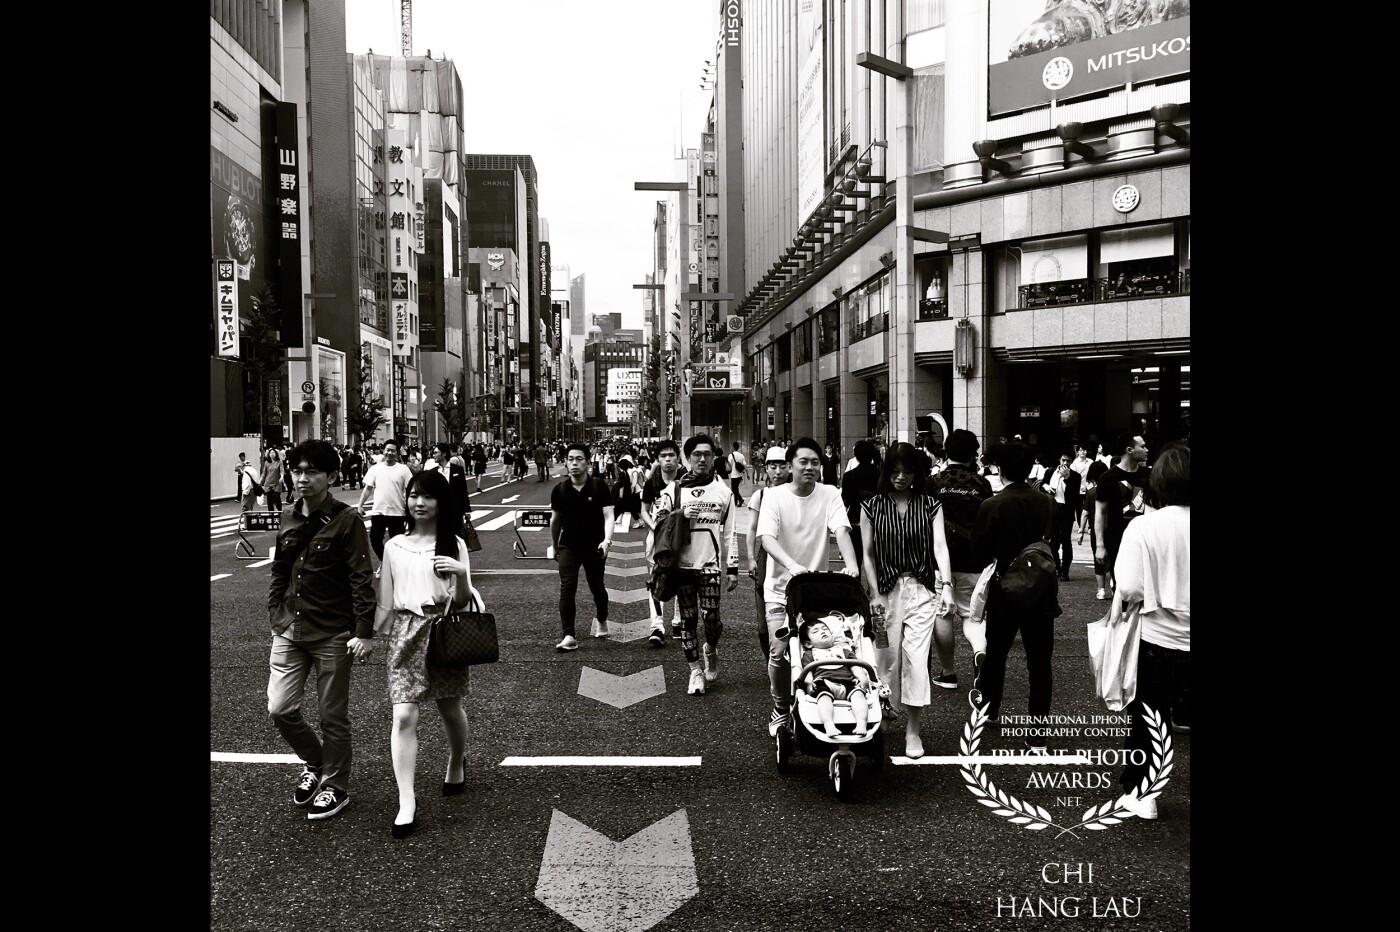 Random street view @ 4-Chome, Ginza, Tokyo.<br />
Ginza, one of the popular and high-class shopping areas in the world. Many internationally renowned department stores, boutiques, restaurants, and cafe located here which attract many tourists to visit. 